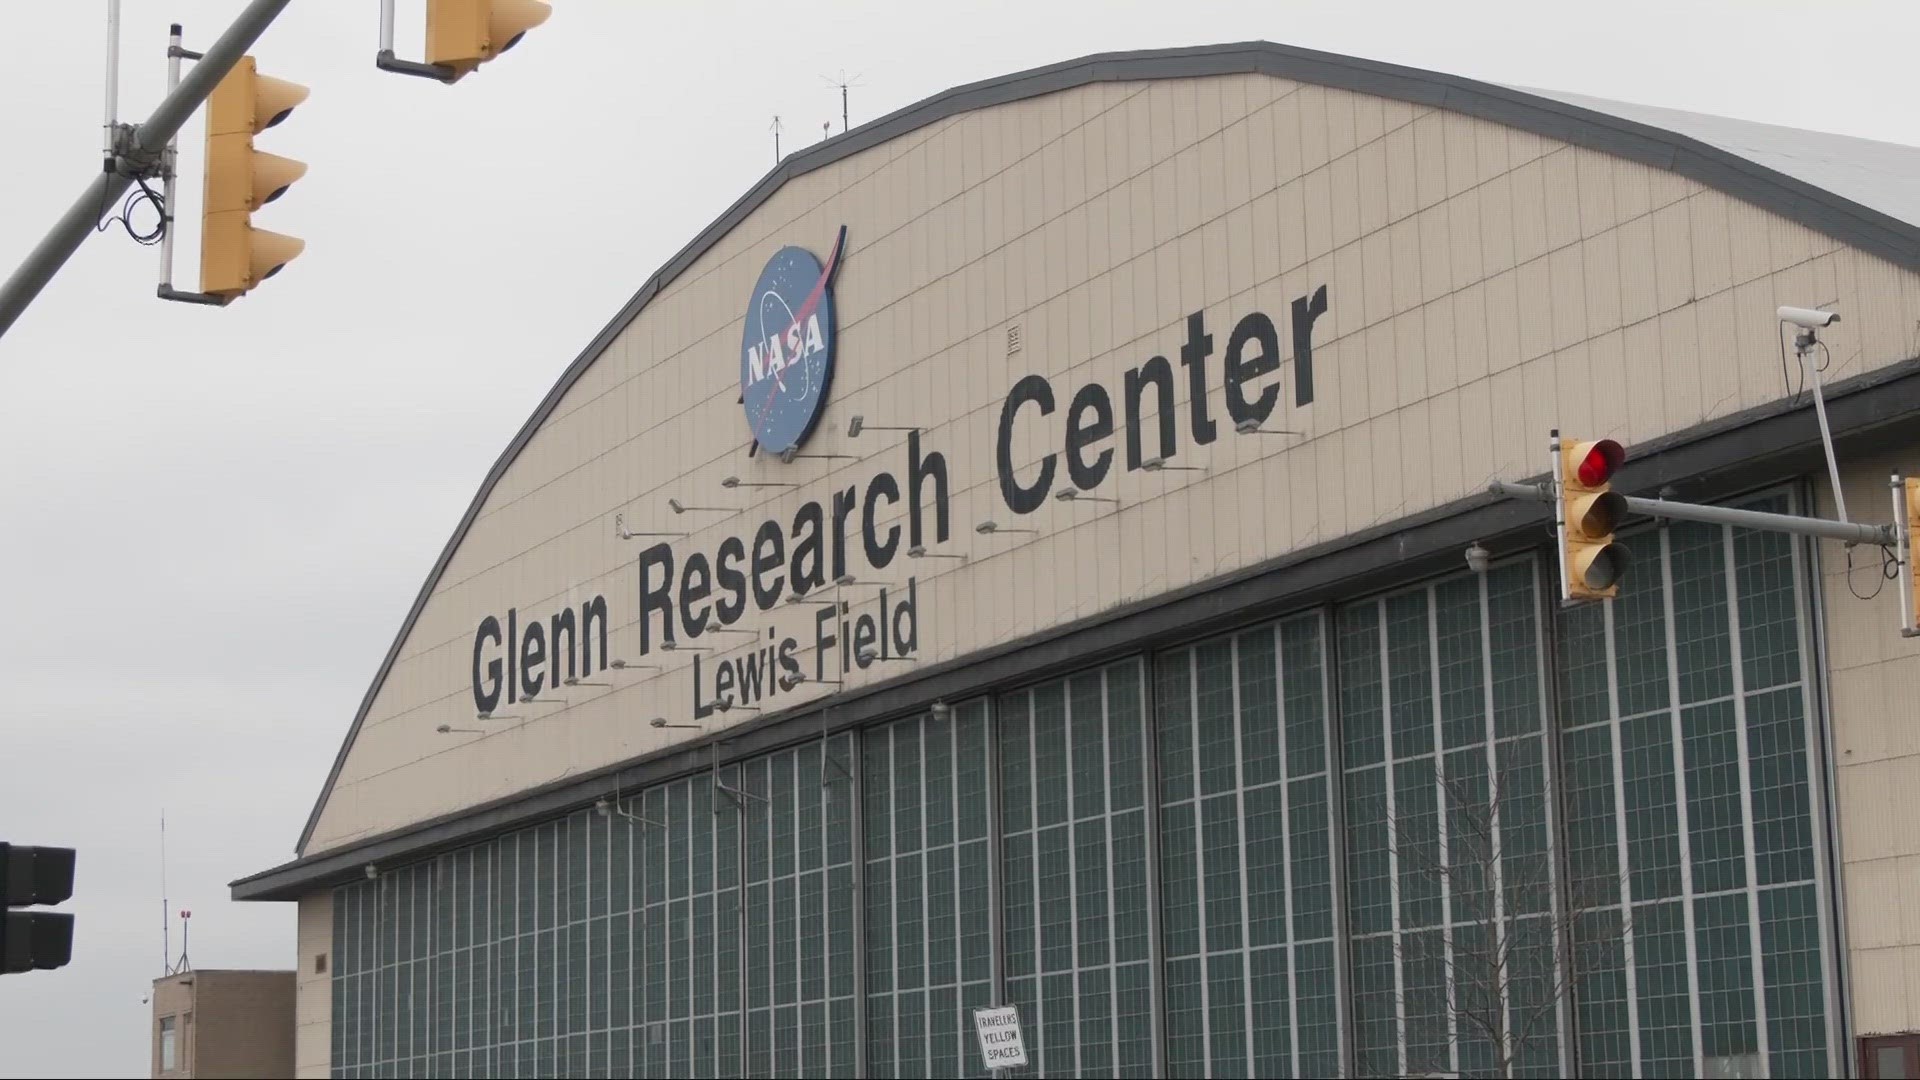 NASA Glenn Research Center has been generating jobs in our region for decades. Enriching the community beyond their gates.